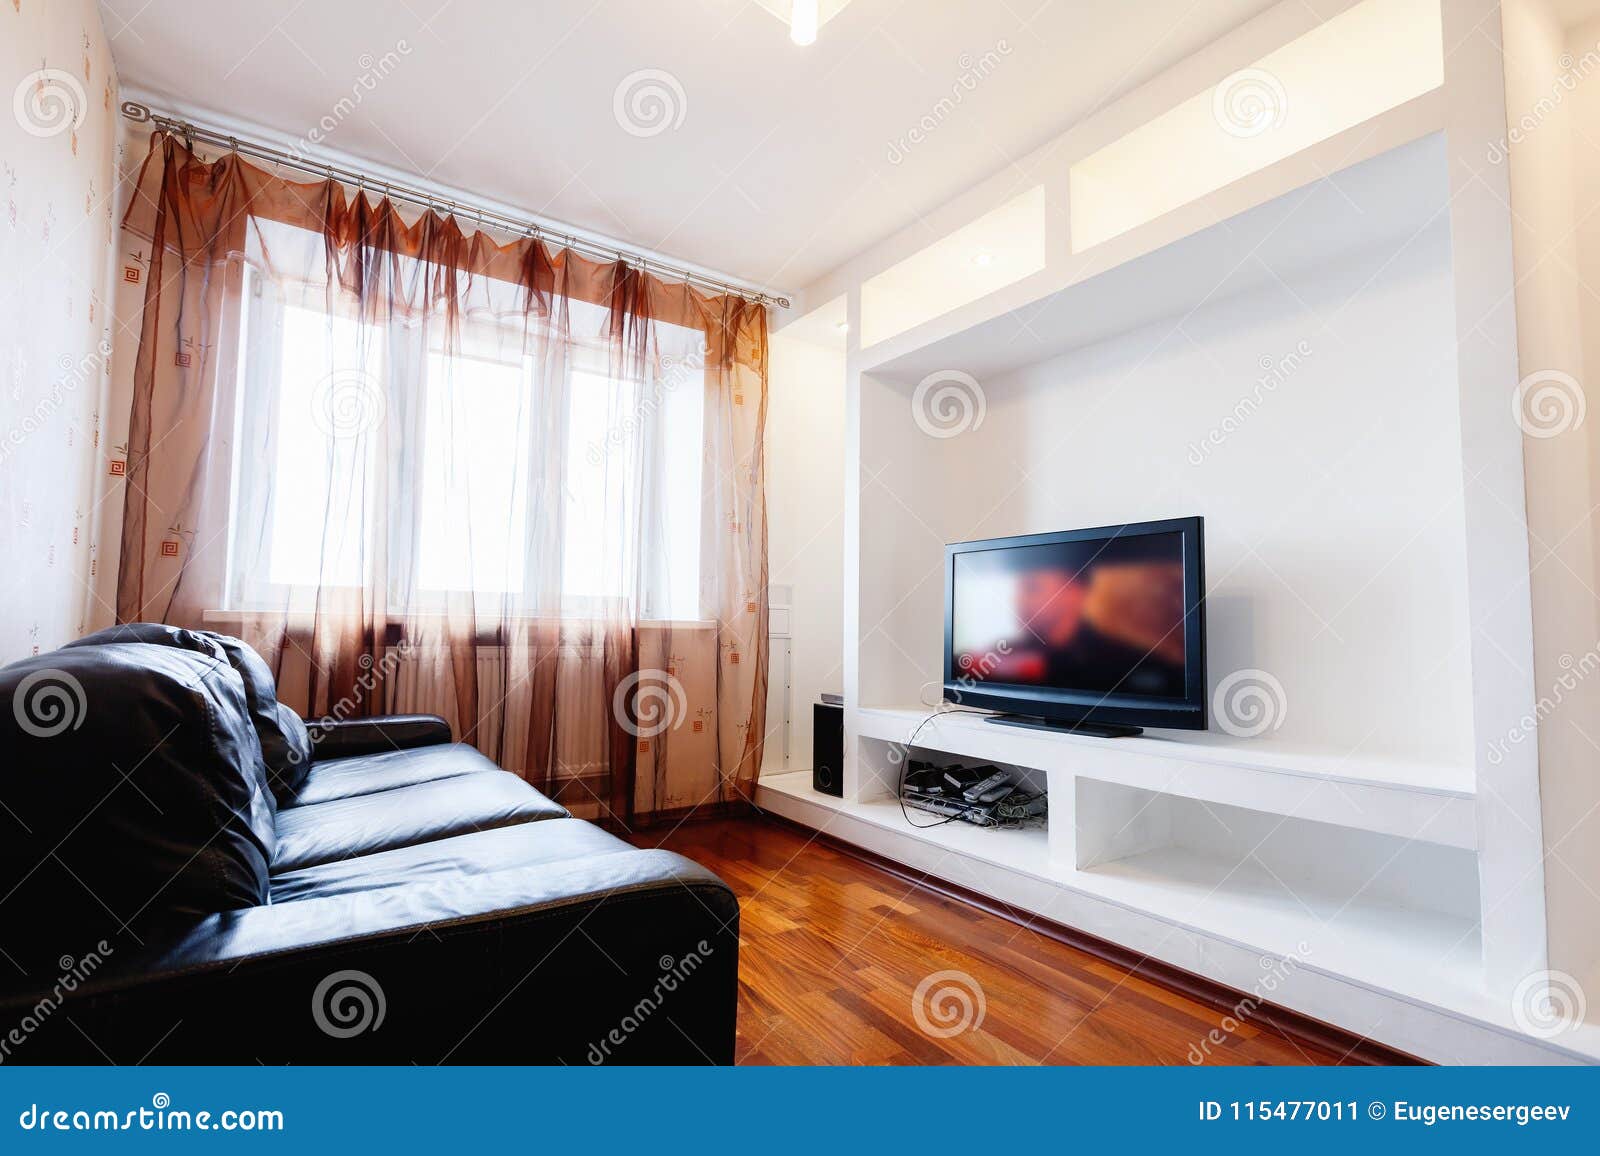 New Room Interior With Black Sofa And Tv Stock Image Image